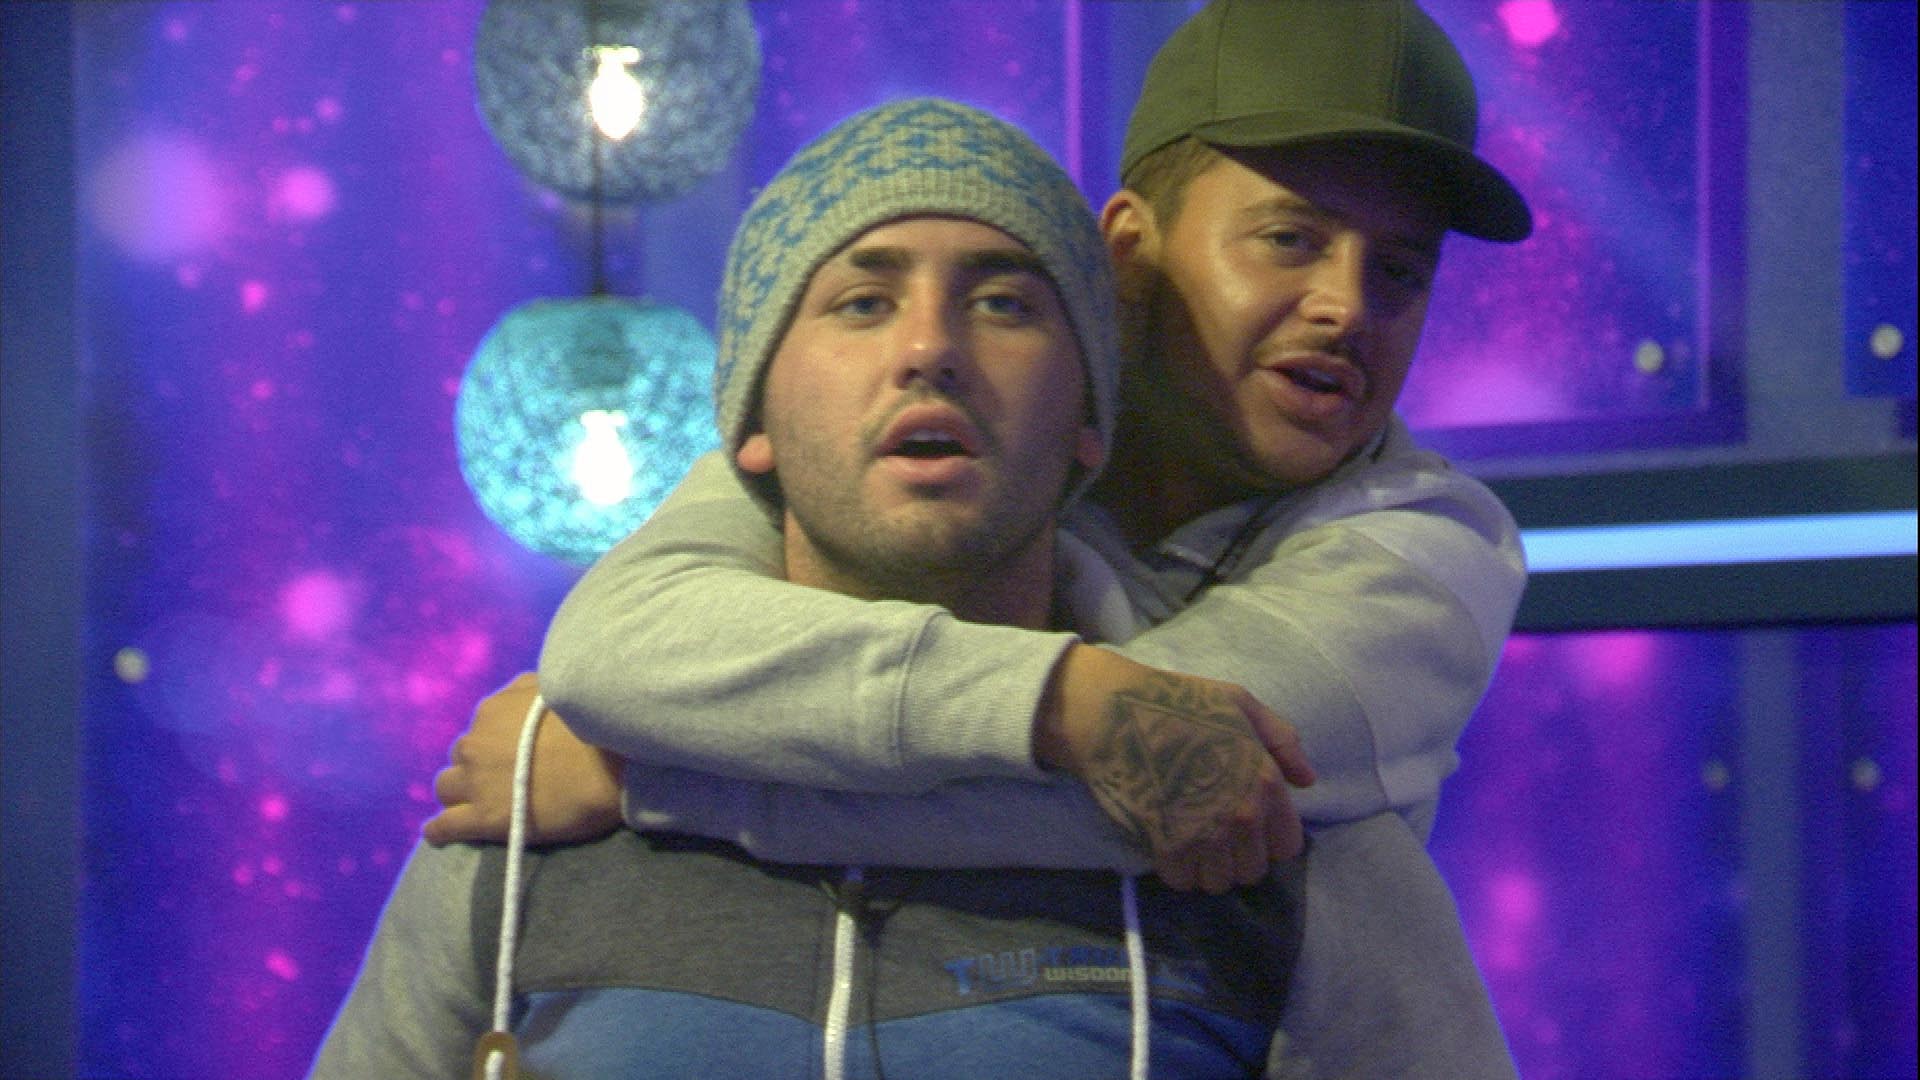 Witnesses suggest that Big Brother stars’ attack was not homophobic